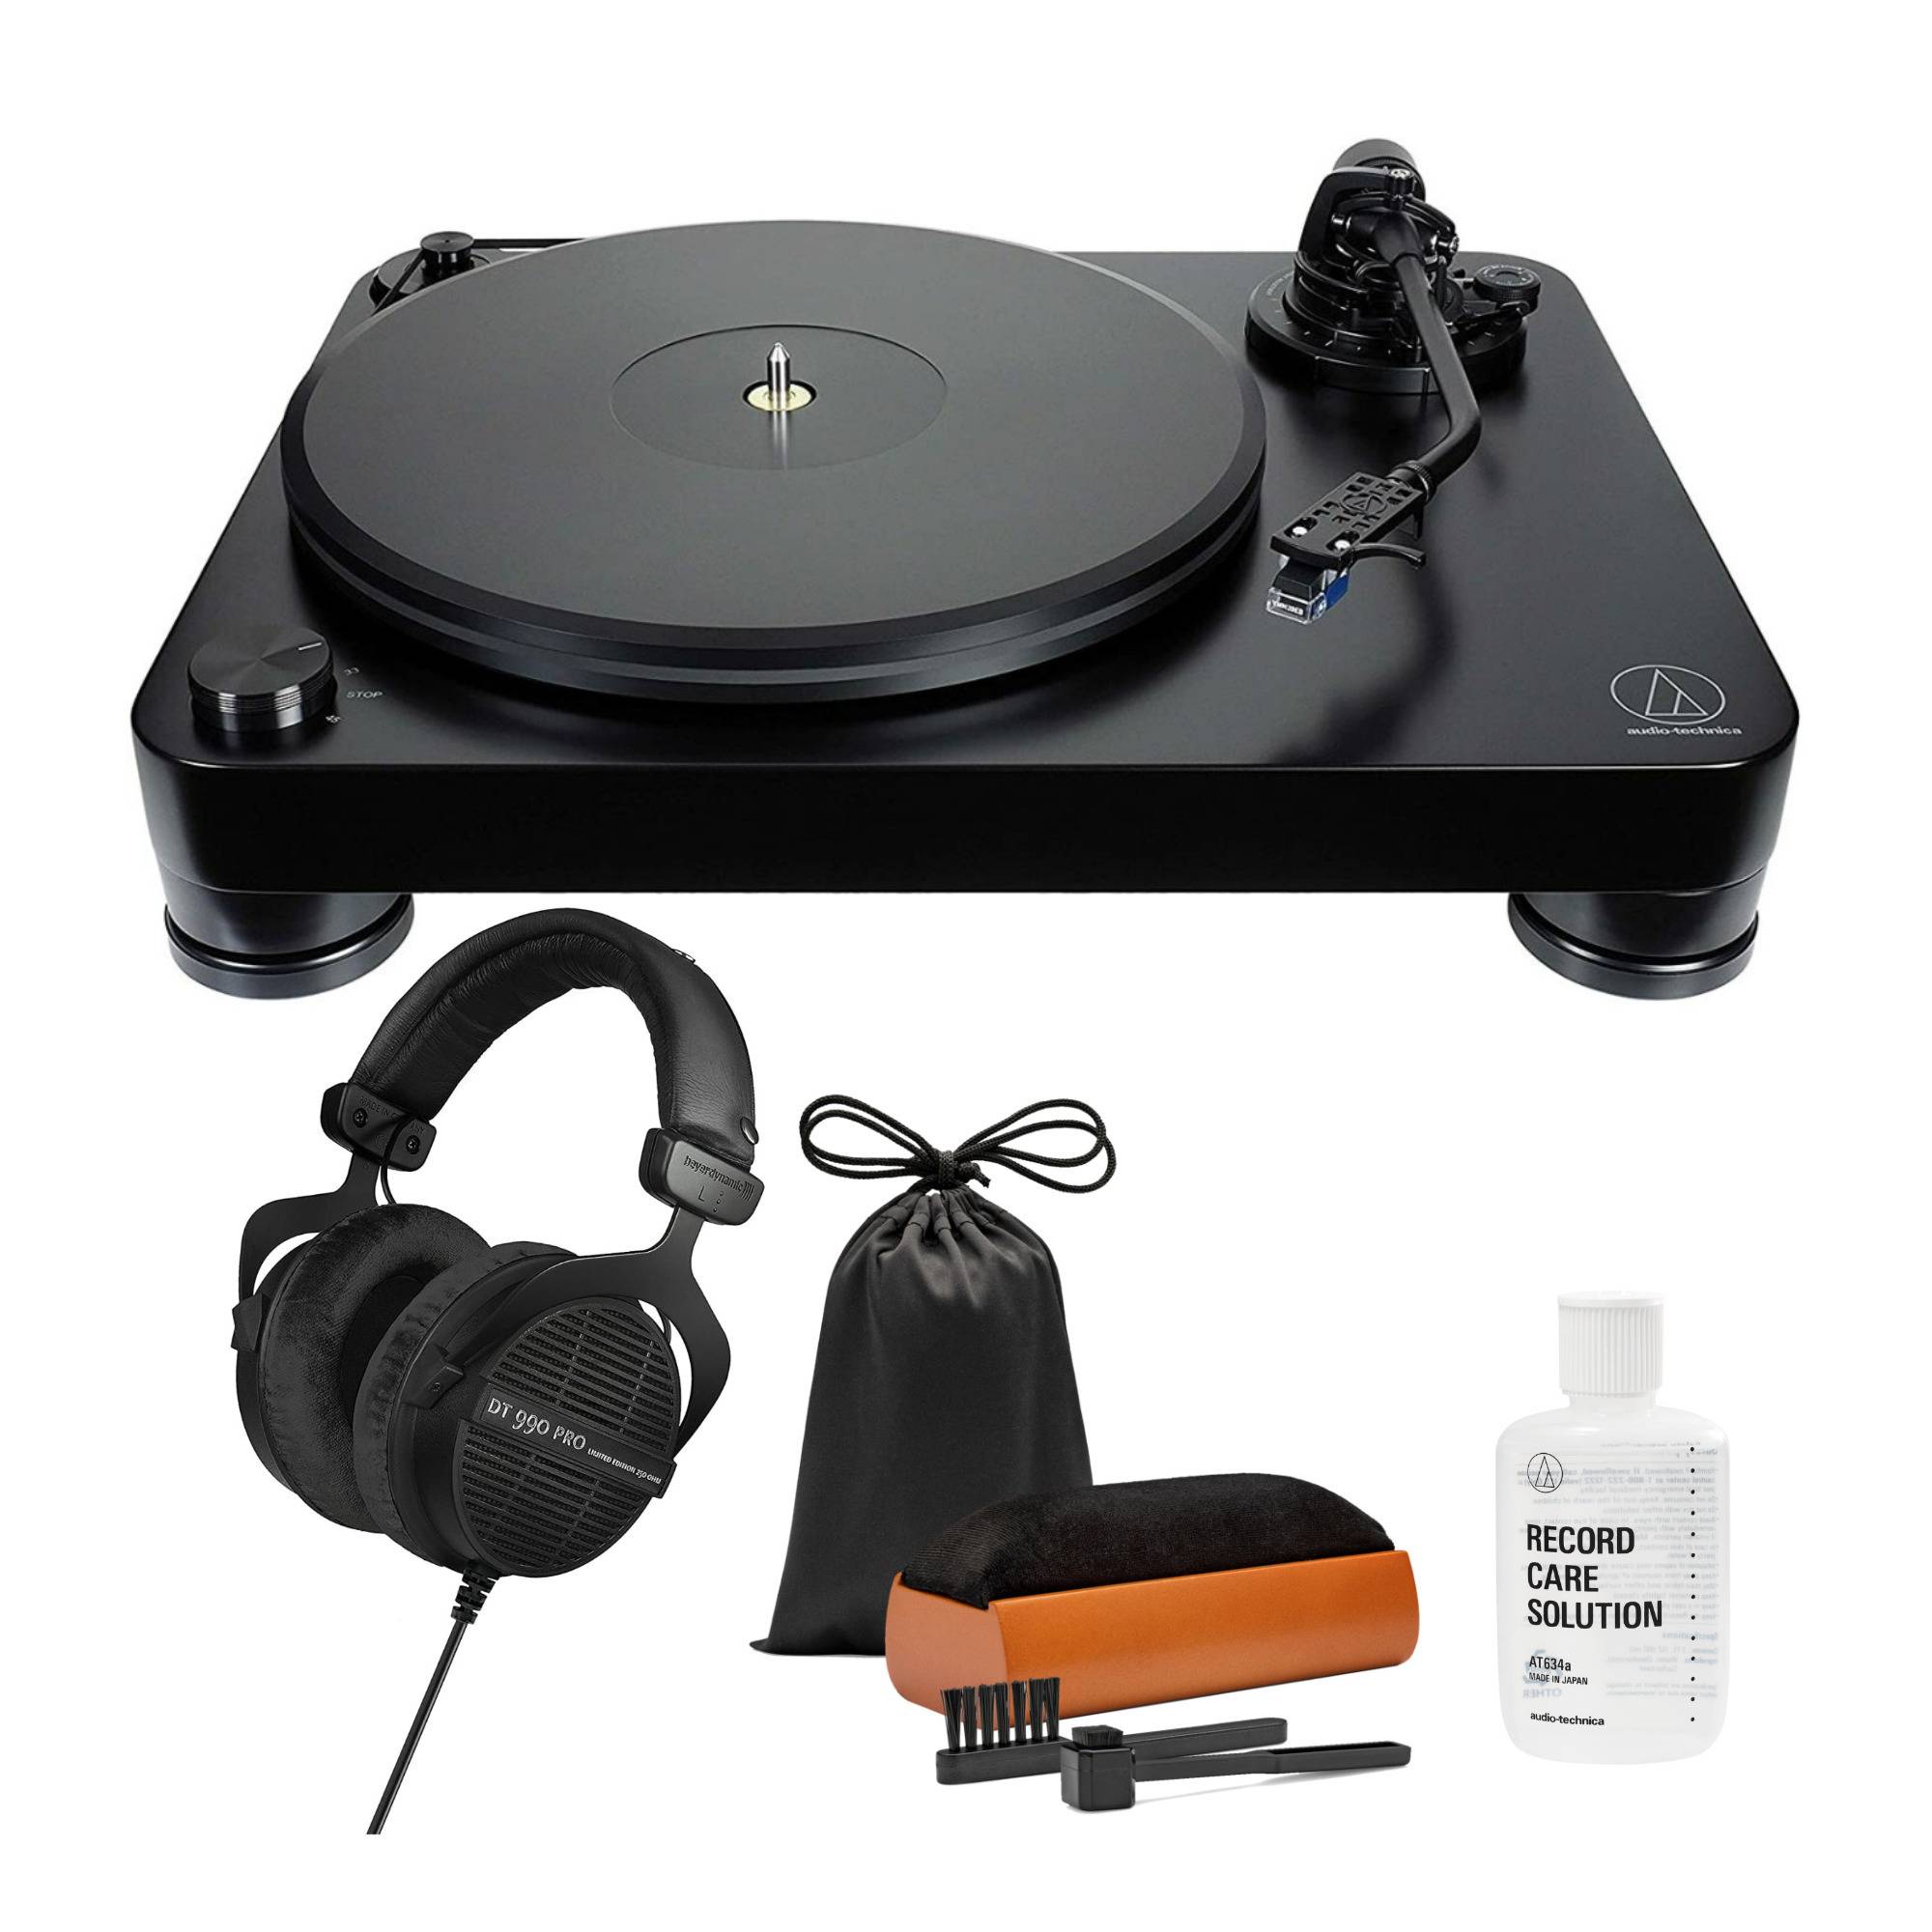 Audio-Technica AT-LP7 Fully Manual Belt-Drive Turntable (Black) with Headphones and Care System